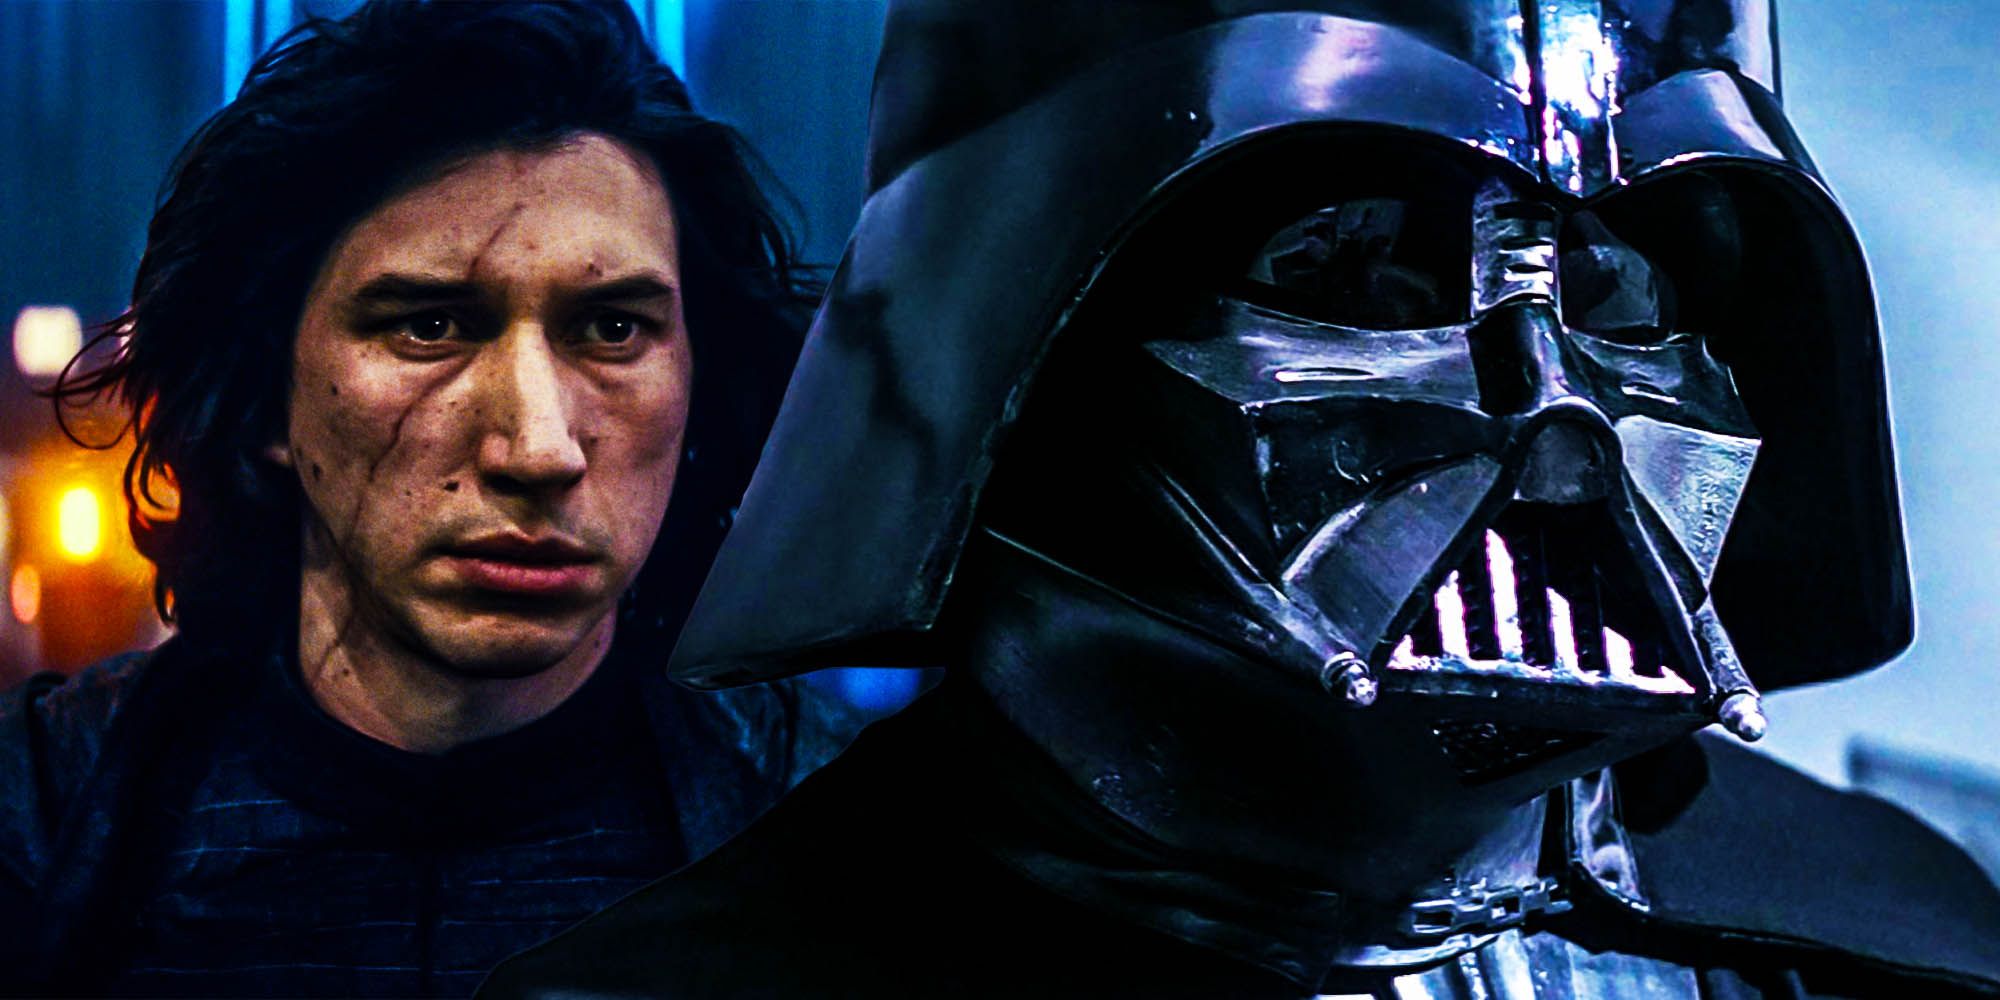 Star wars kylo ren could never be the new vader